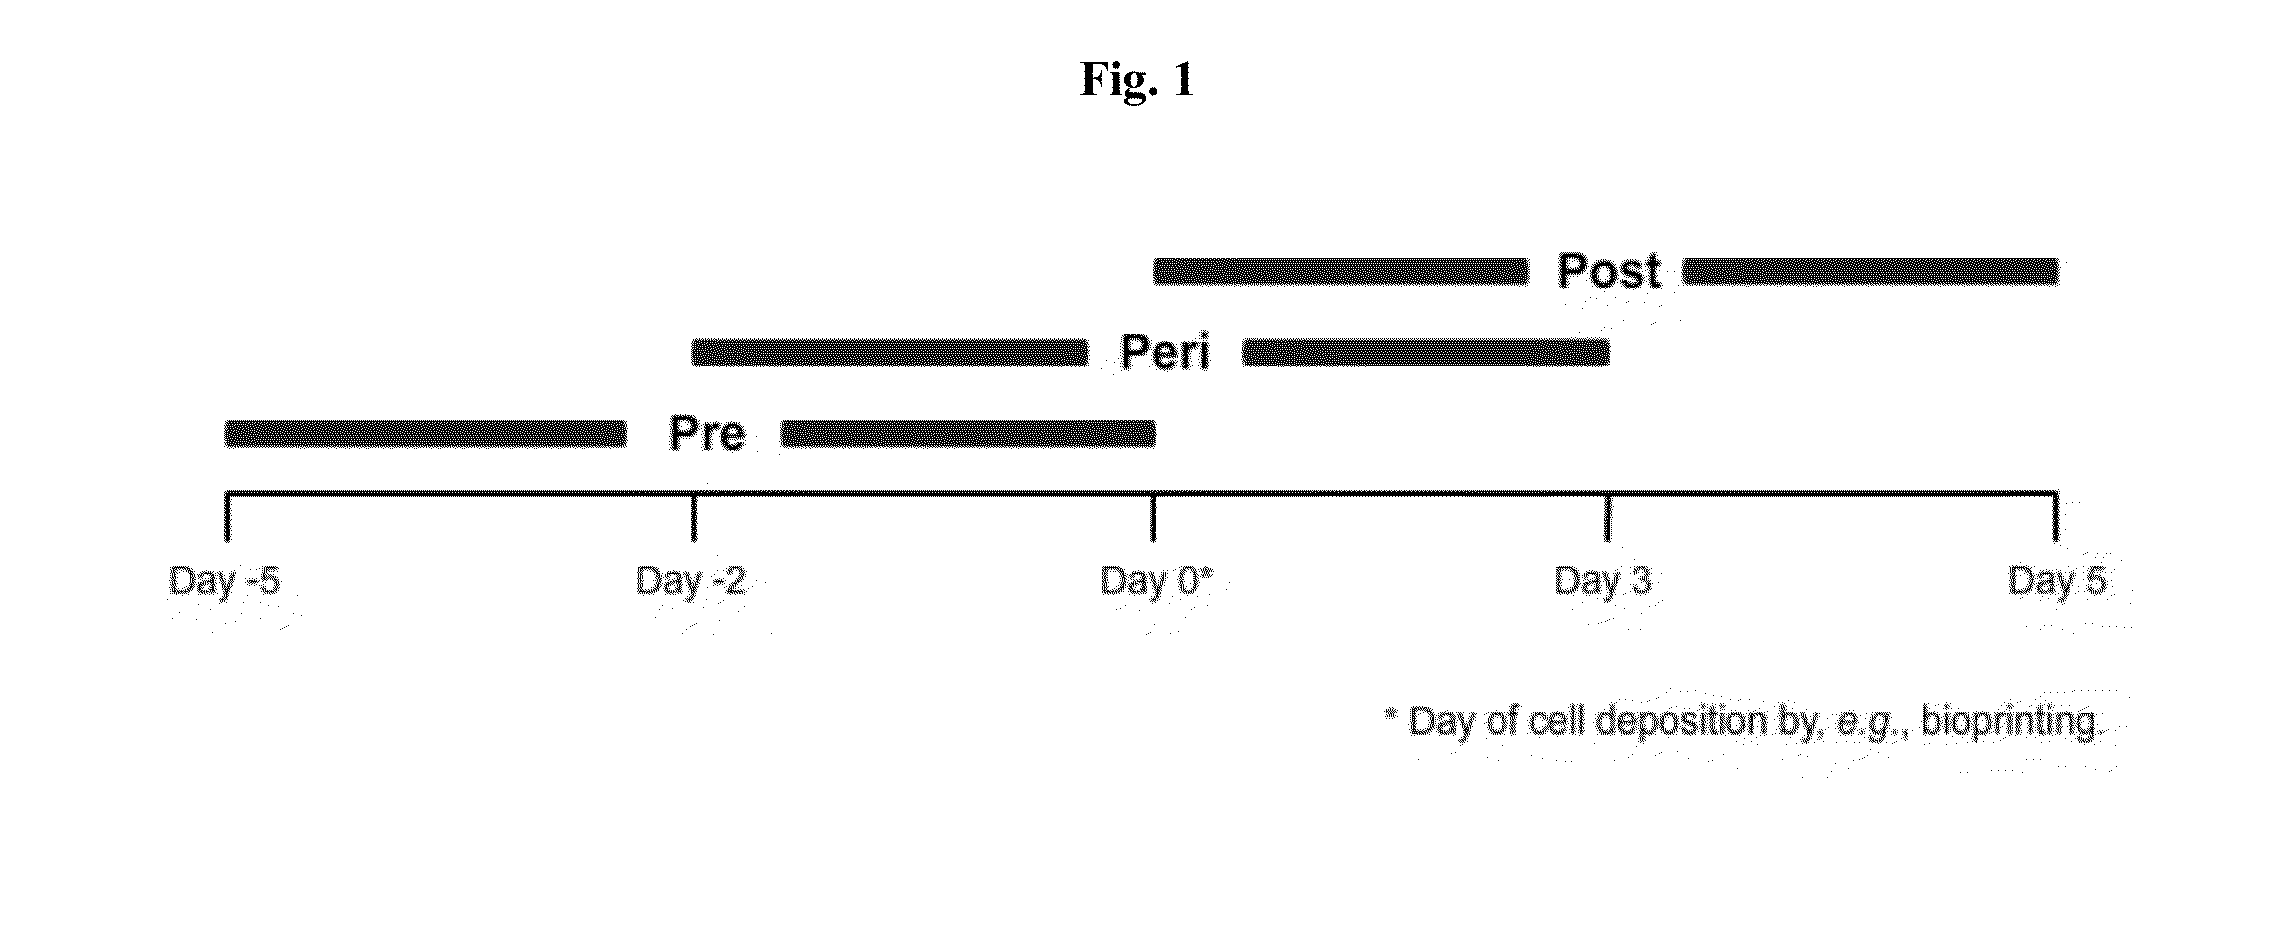 Engineered three-dimensional connective tissue constructs and methods of making the same